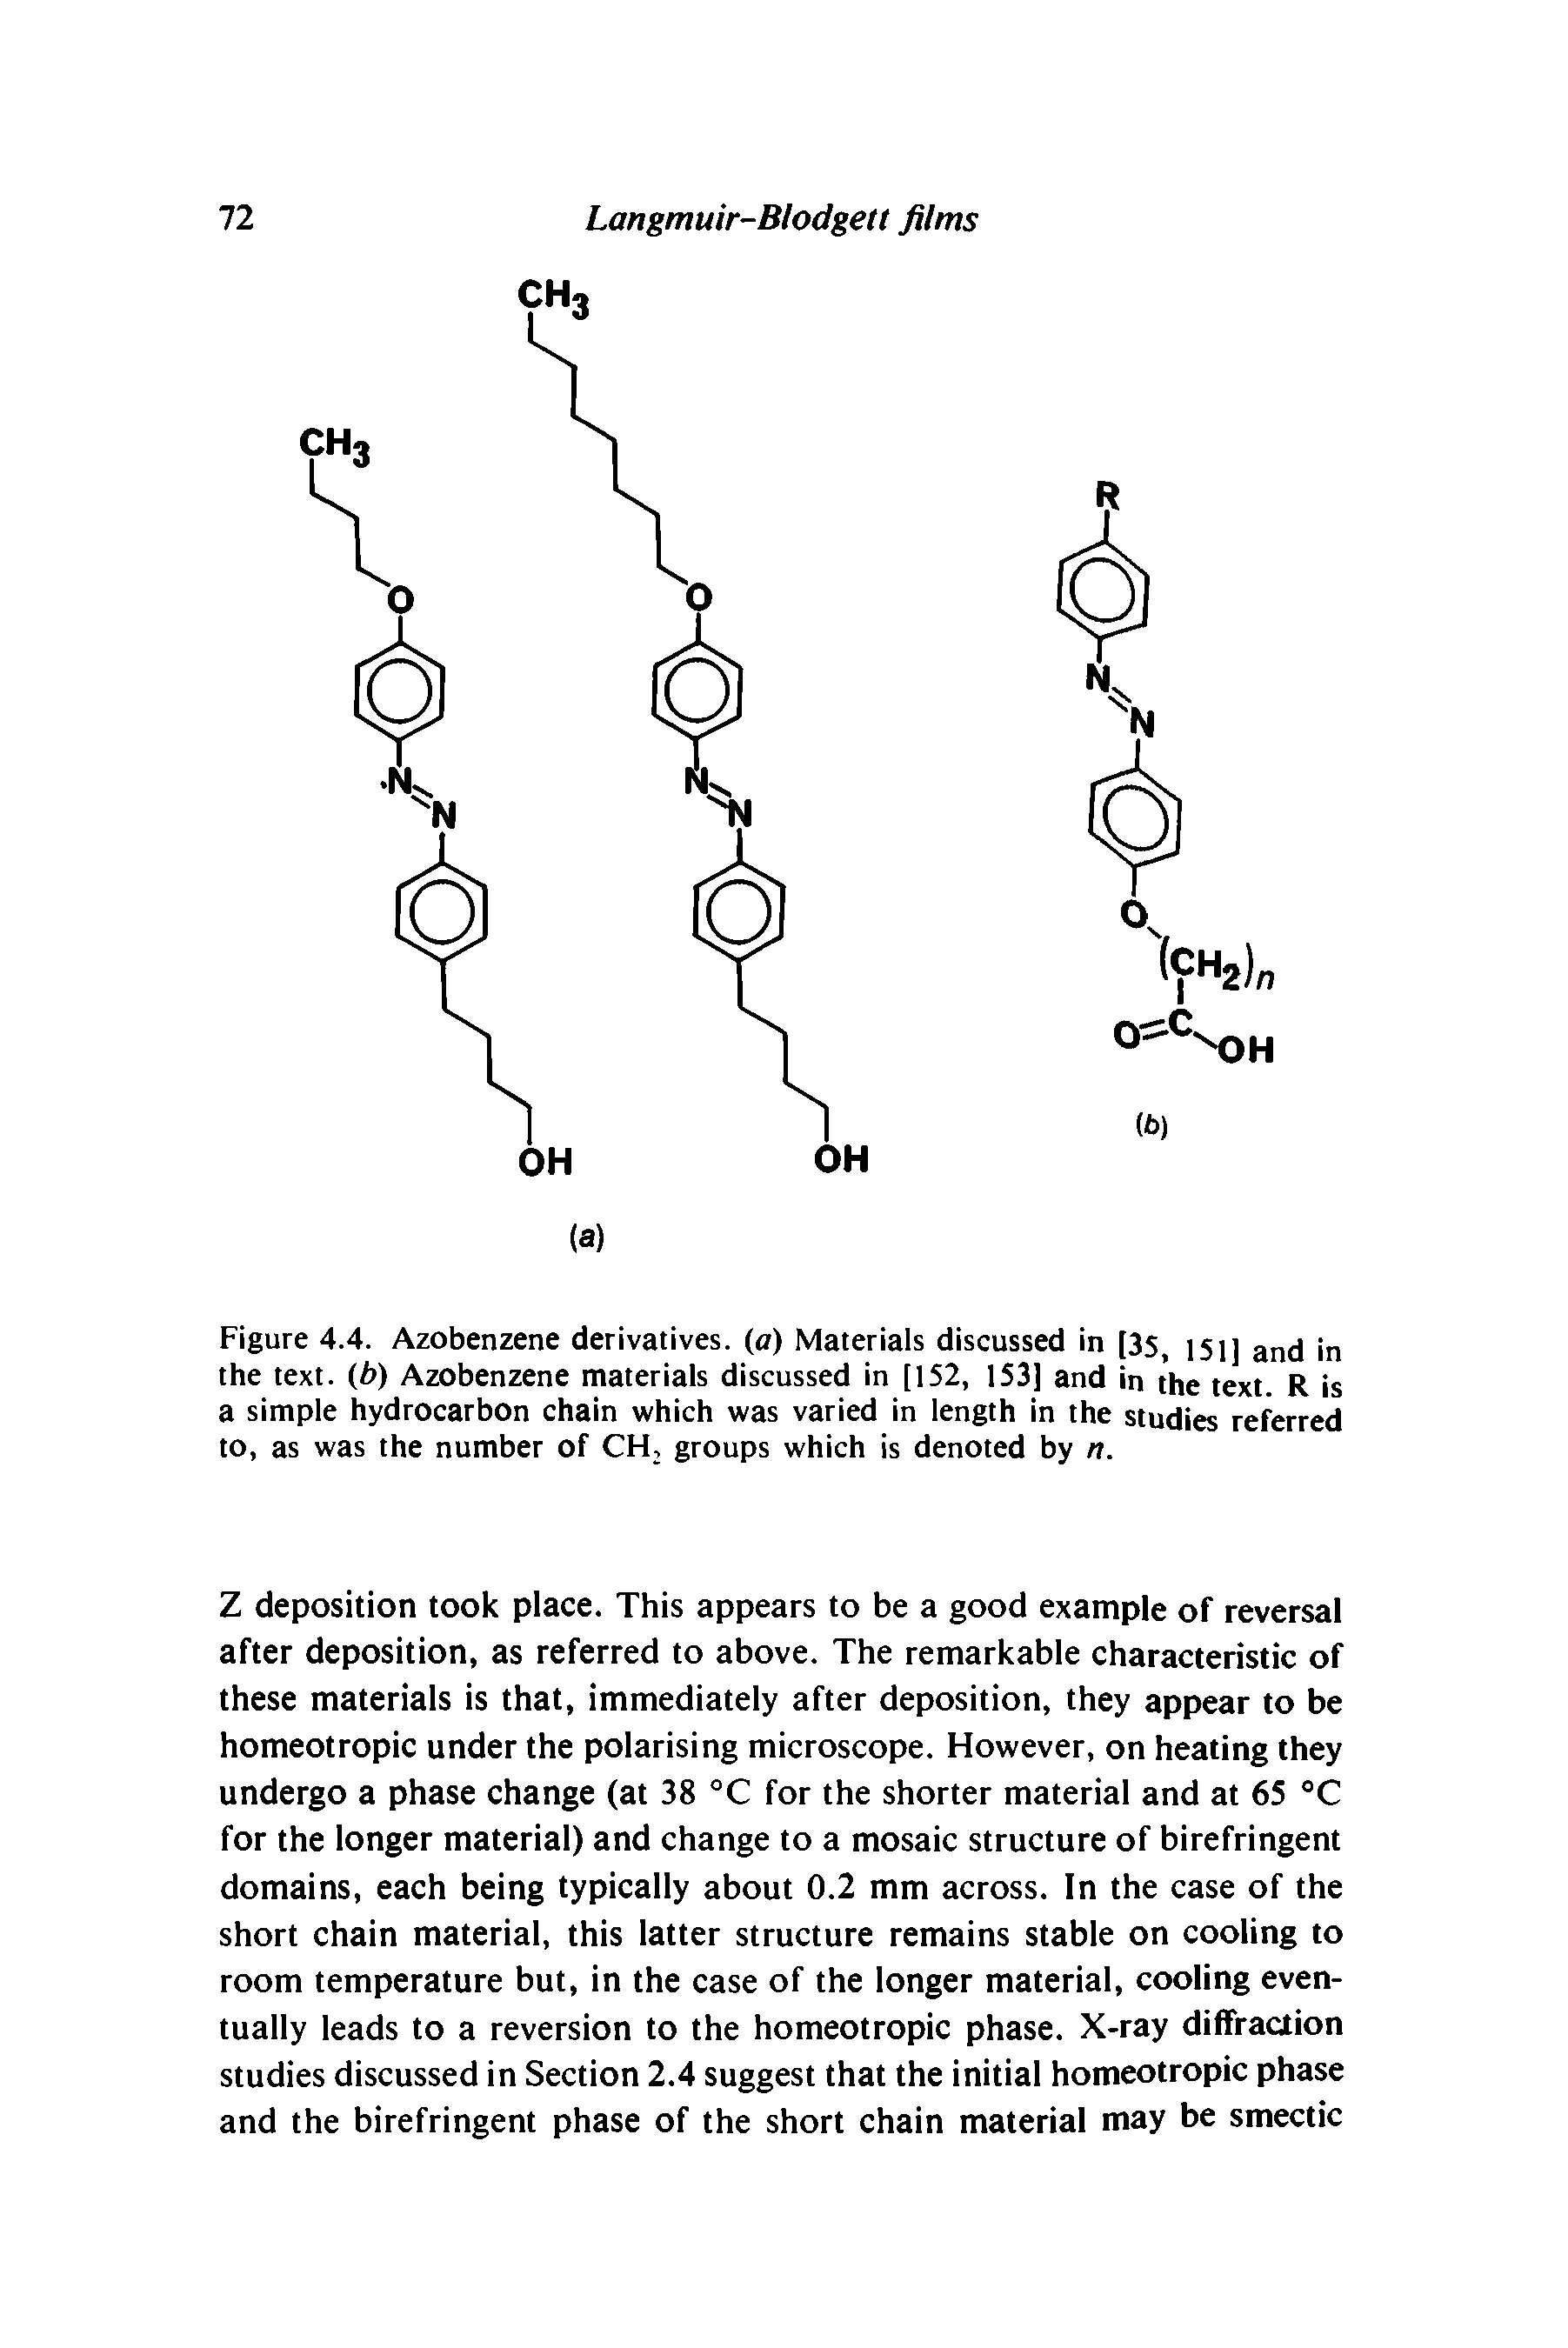 Figure 4.4. Azobenzene derivatives, (a) Materials discussed in [35> 151] ancj jn the text, (b) Azobenzene materials discussed in [152, 153] and in the text R is a simple hydrocarbon chain which was varied in length in the studies referred to, as was the number of CH, groups which is denoted by n.